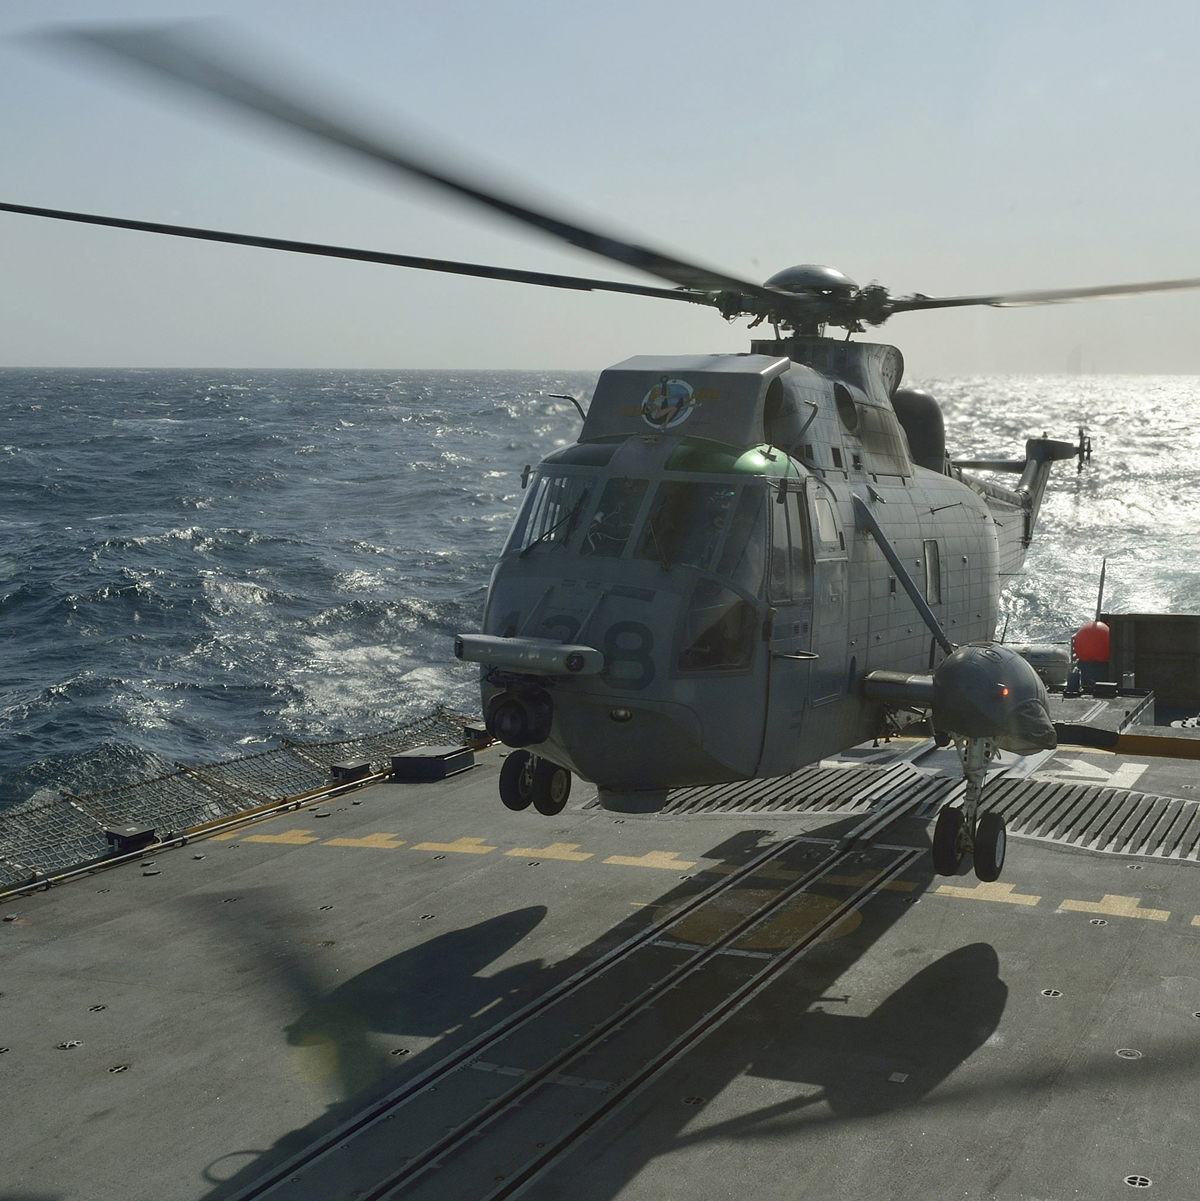 A Sea King helicopter lands on the flight deck of a Royal Canadian Navy ship.